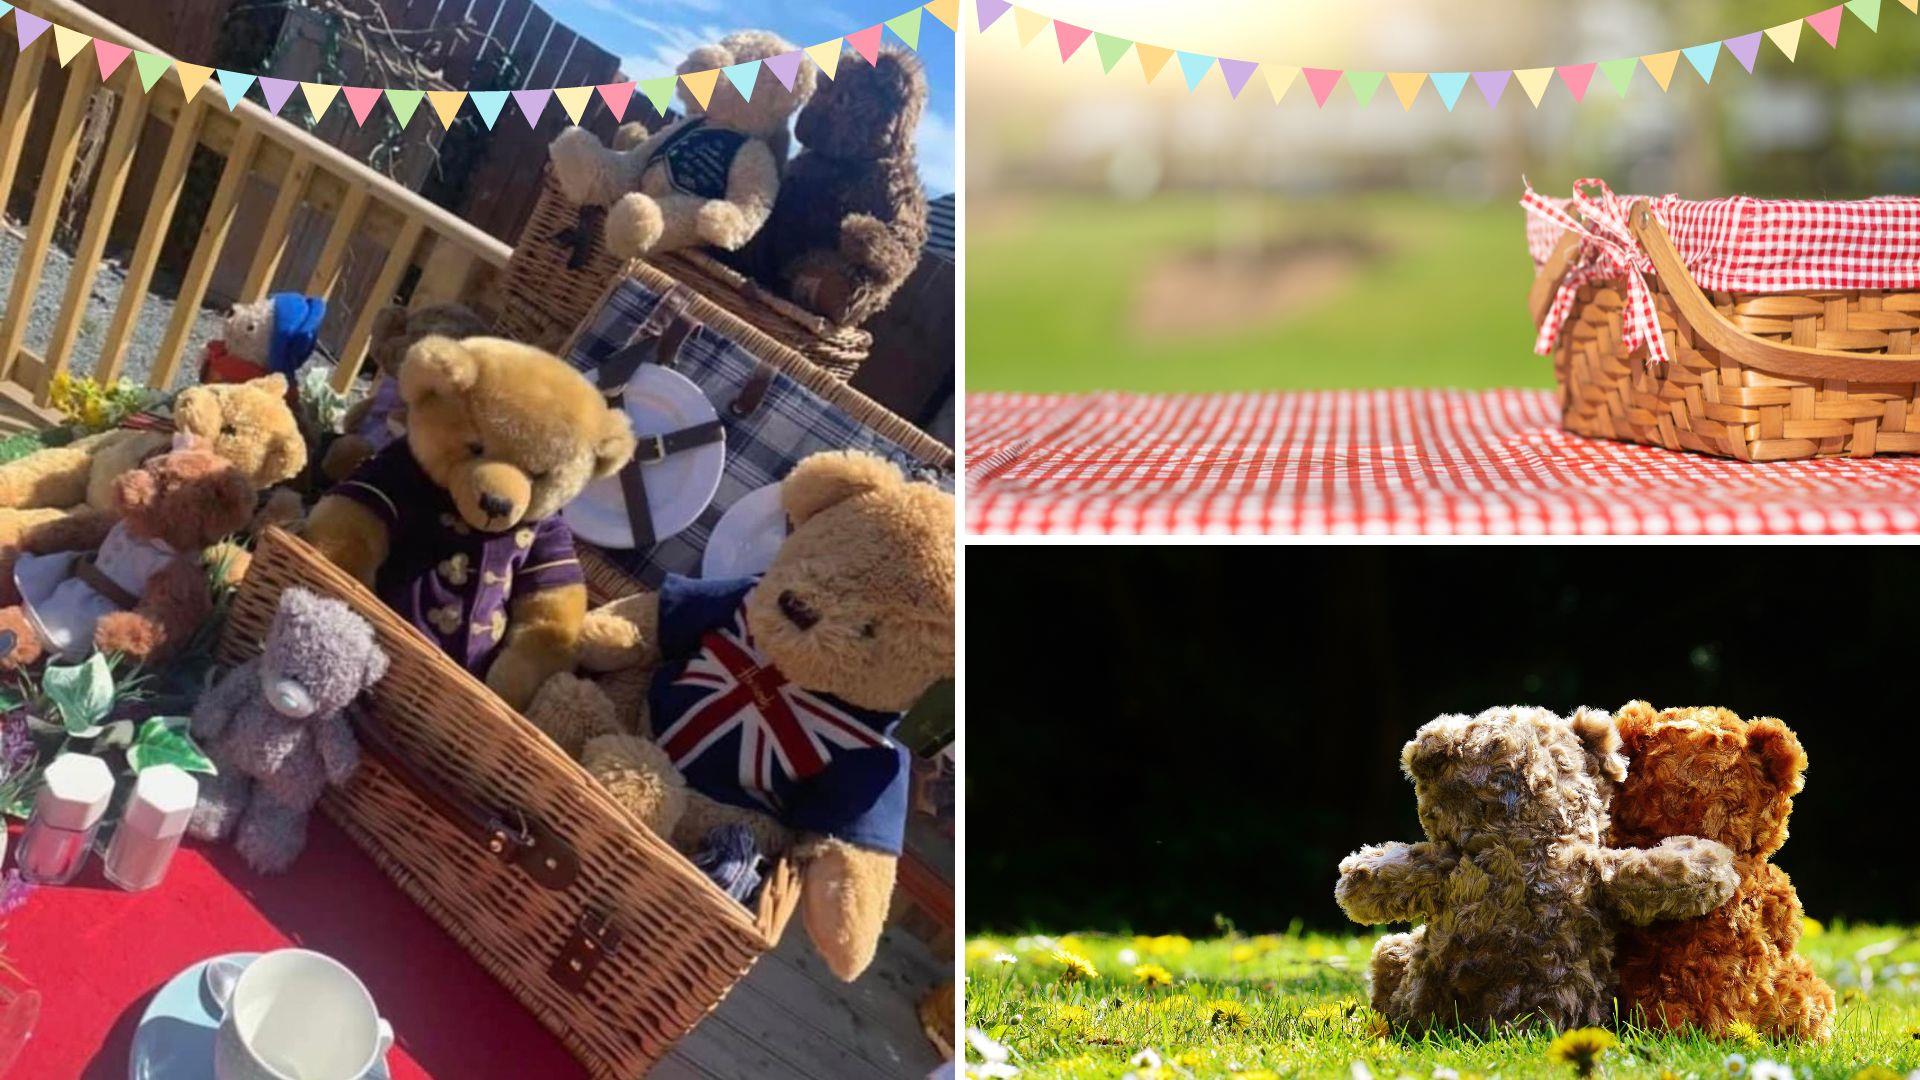 Collage of Teddy's, one pictures is a selection of Teddys in a picnic basket, then a picture of the back of two Teddys as they sit on the grass, and a